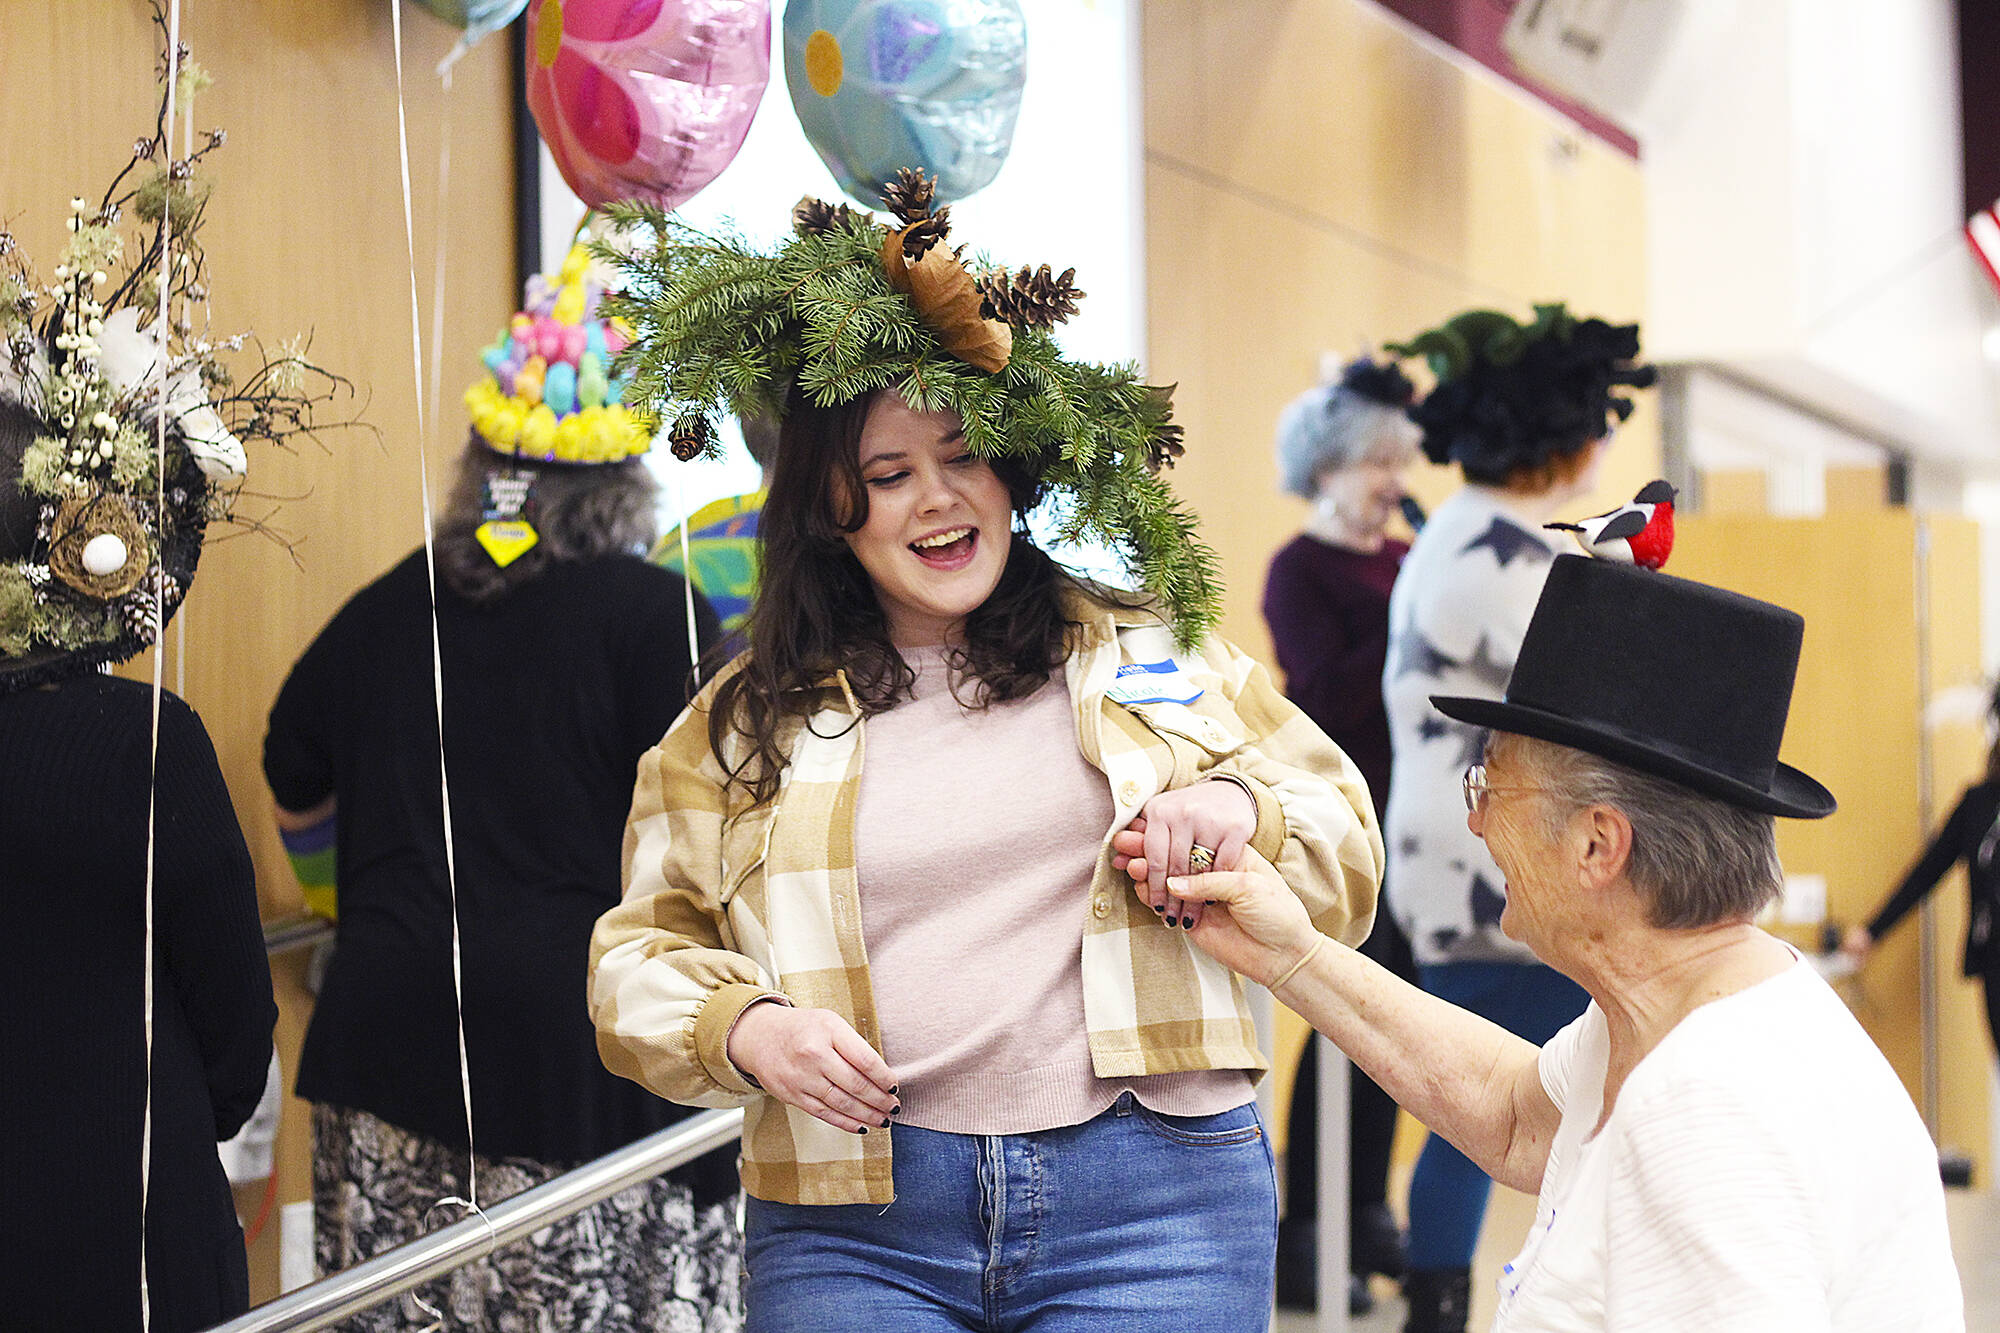 The Enumclaw Garden Club’s annual Breakfast for the Birds is scheduled for Feb. 27 at the Expo Center’s Field House; here are some pictures from last year’s hat parade that were never published. Photos by Ray Miller-Still